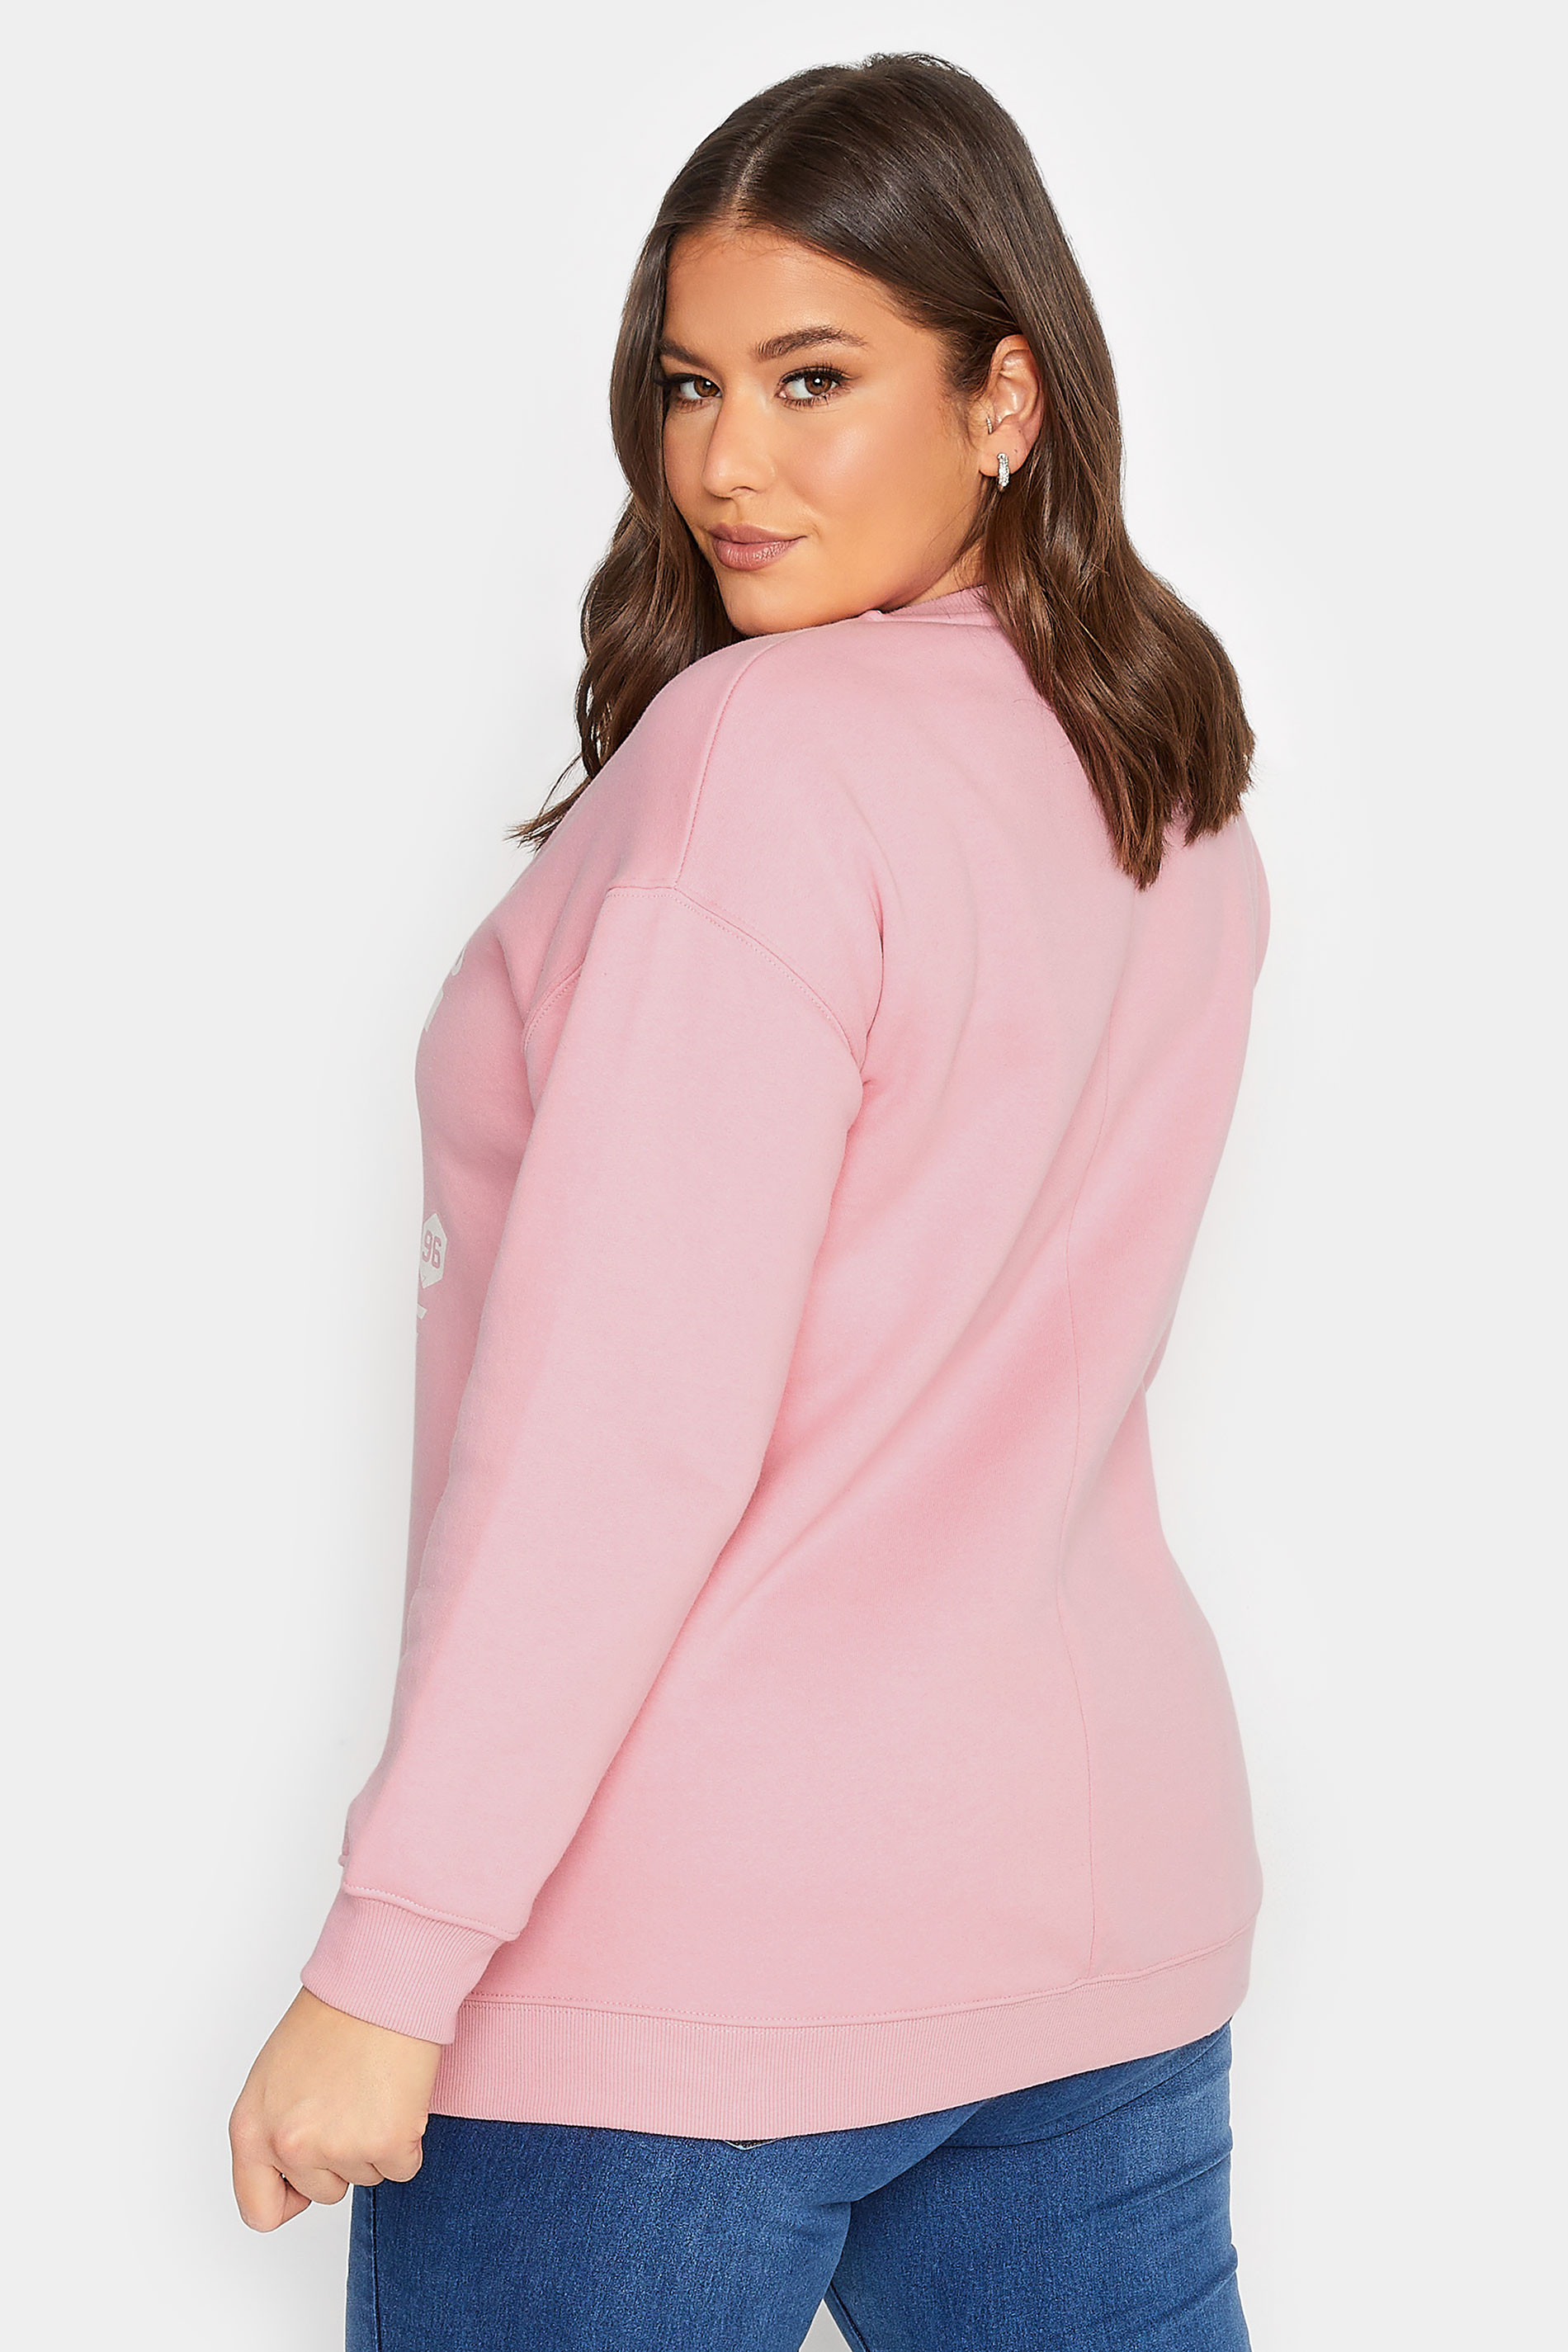 YOURS Plus Size Pink 'San Diego' Slogan Sweatshirt | Yours Clothing 3